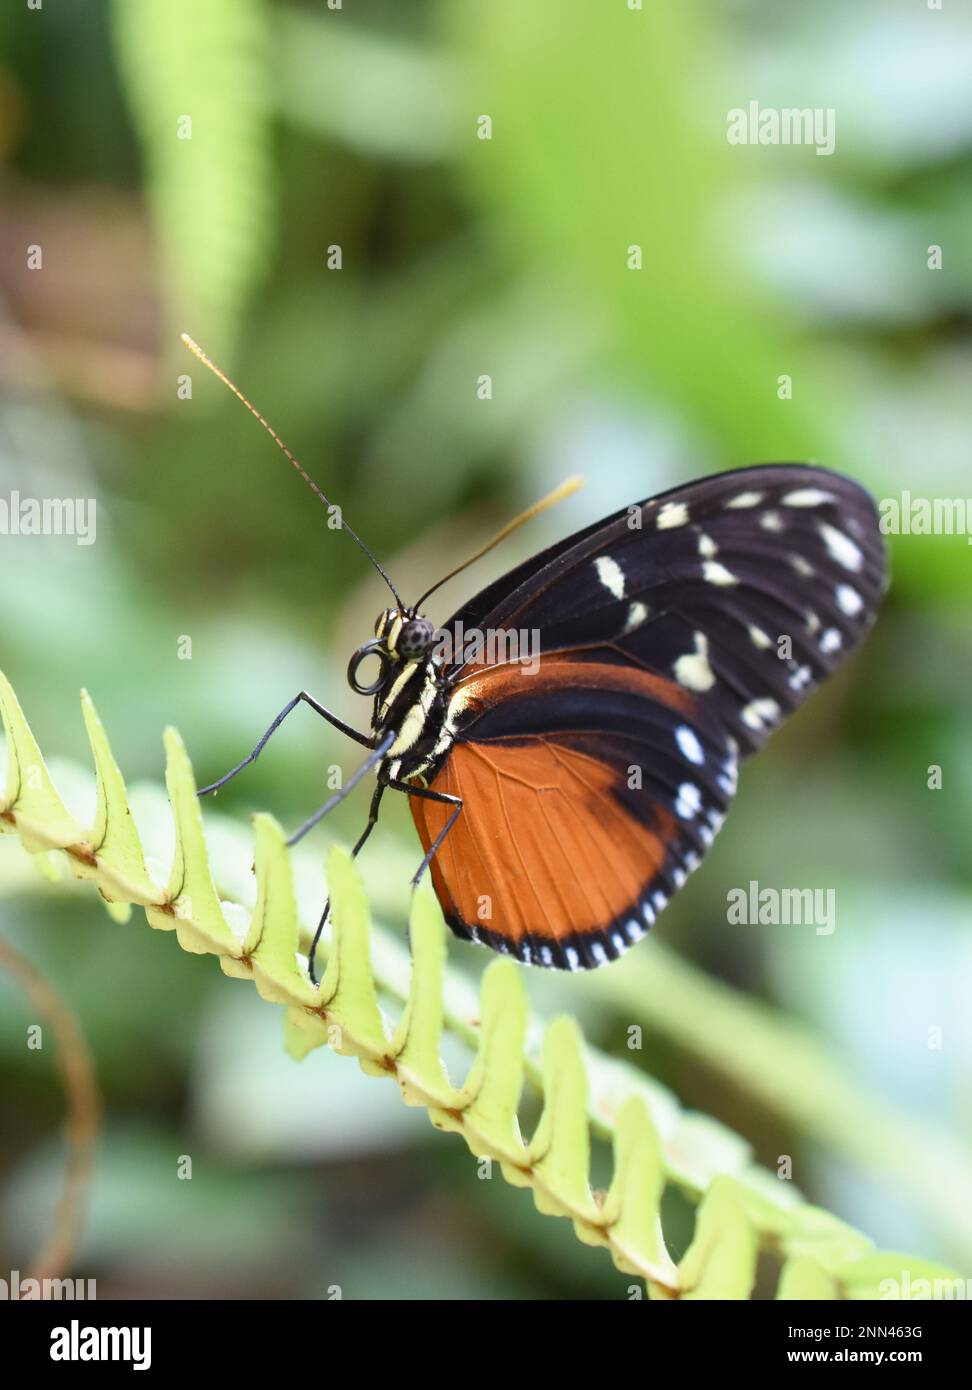 The tiger longwing butterfly Heliconius hecale sitting on a leaf Stock Photo